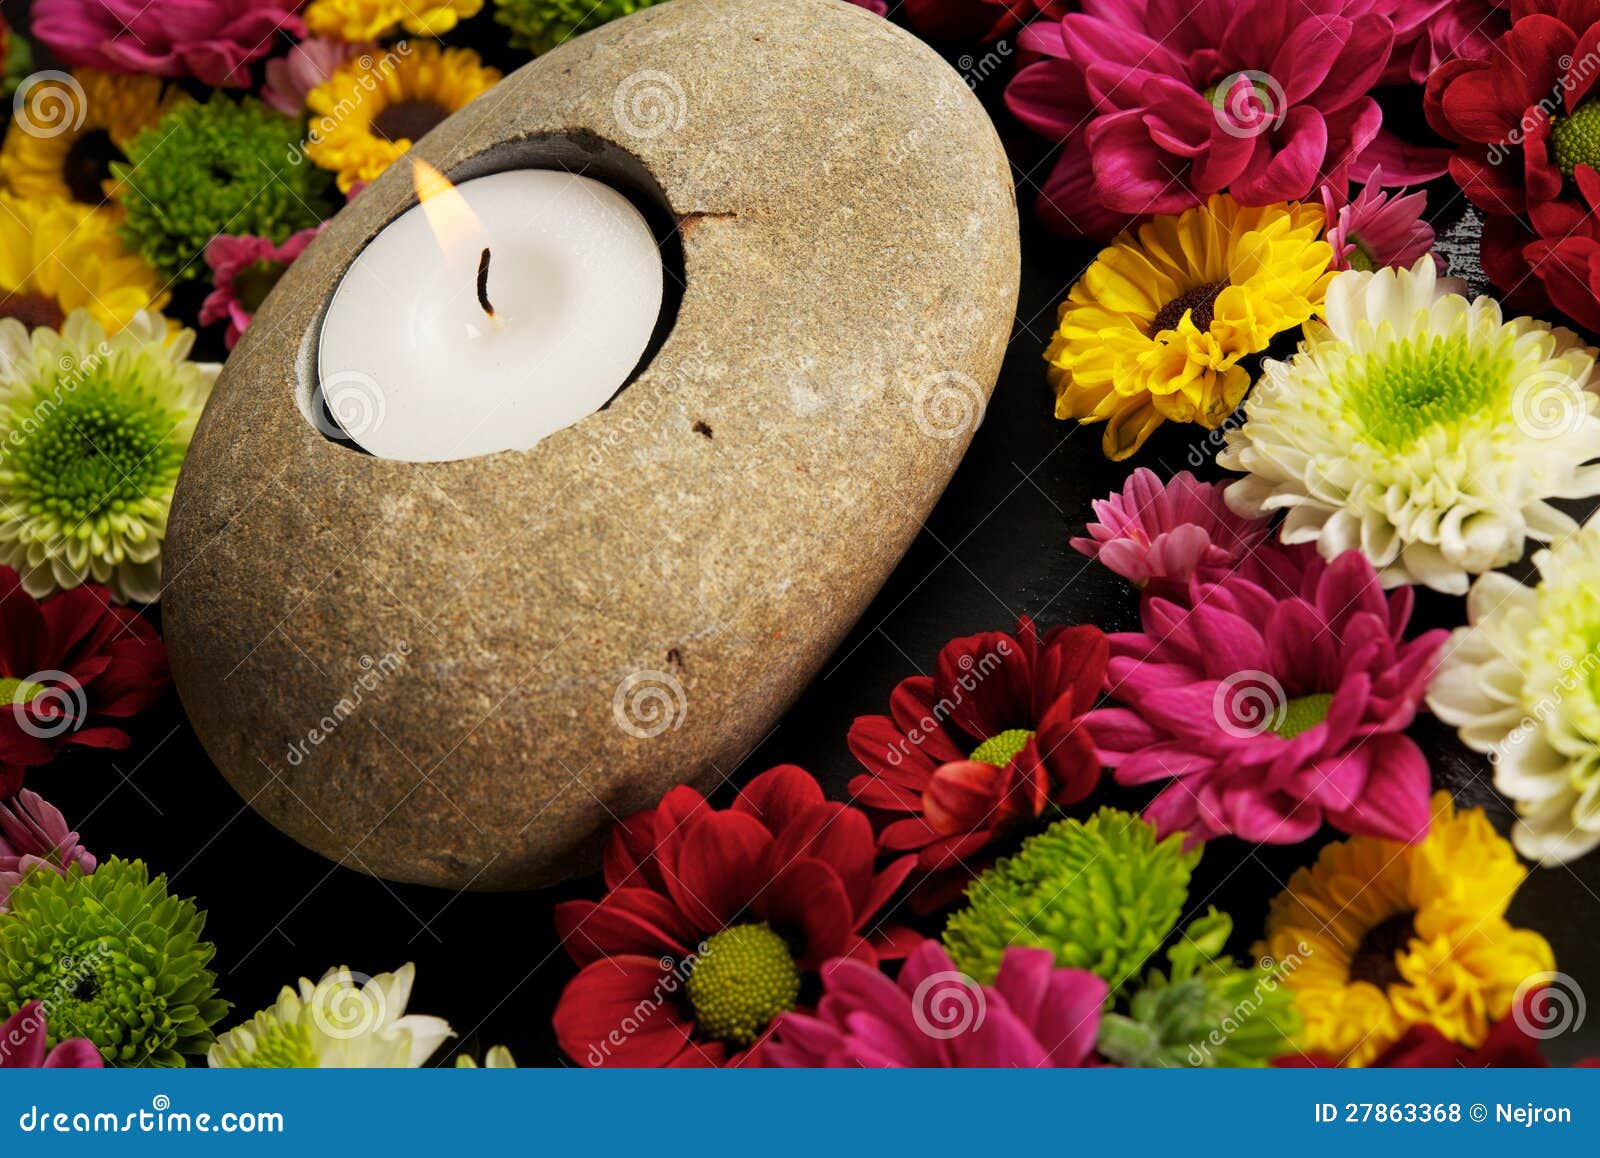 Candle and Flowers on Black Background Stock Photo - Image of aromatic